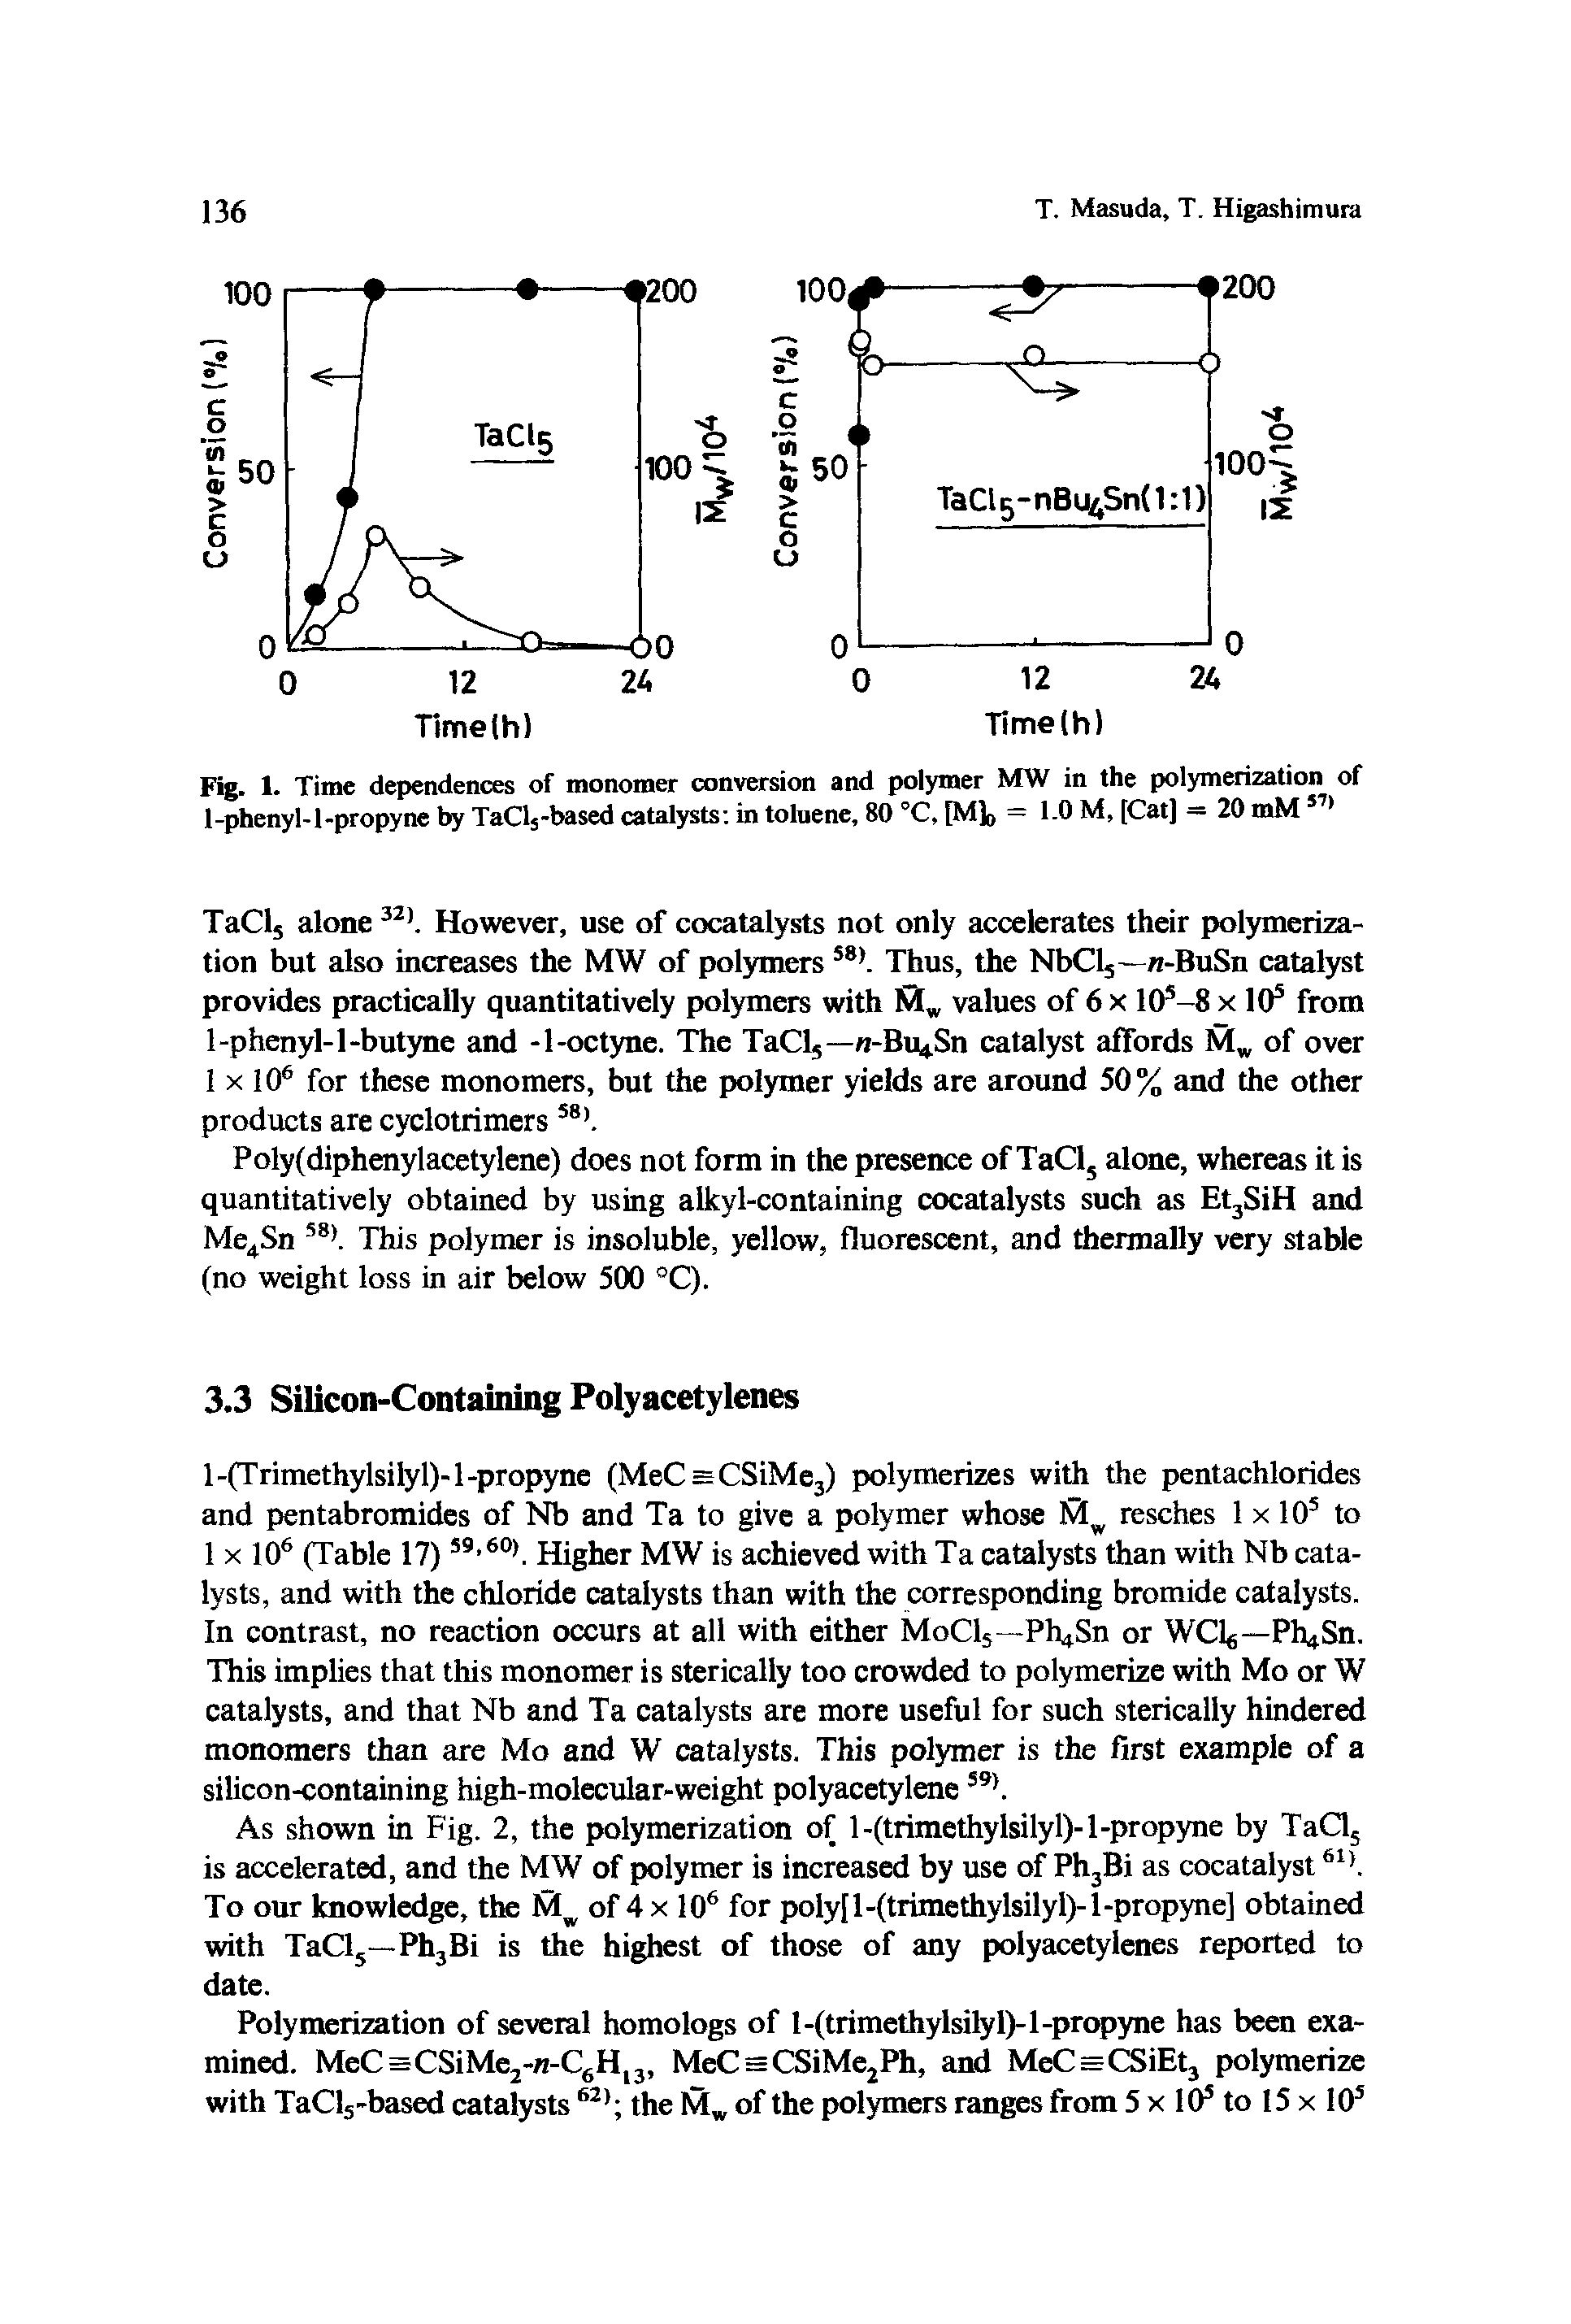 Fig. 1. Time dependences of monomer conversion and polymer MW in the polymerization of 1-phenyl-l-propyne by TaCls-based catalysts in toluene, 80 °C, [Ml, = 1.0 M, [Cat] = 20 mM 57)...